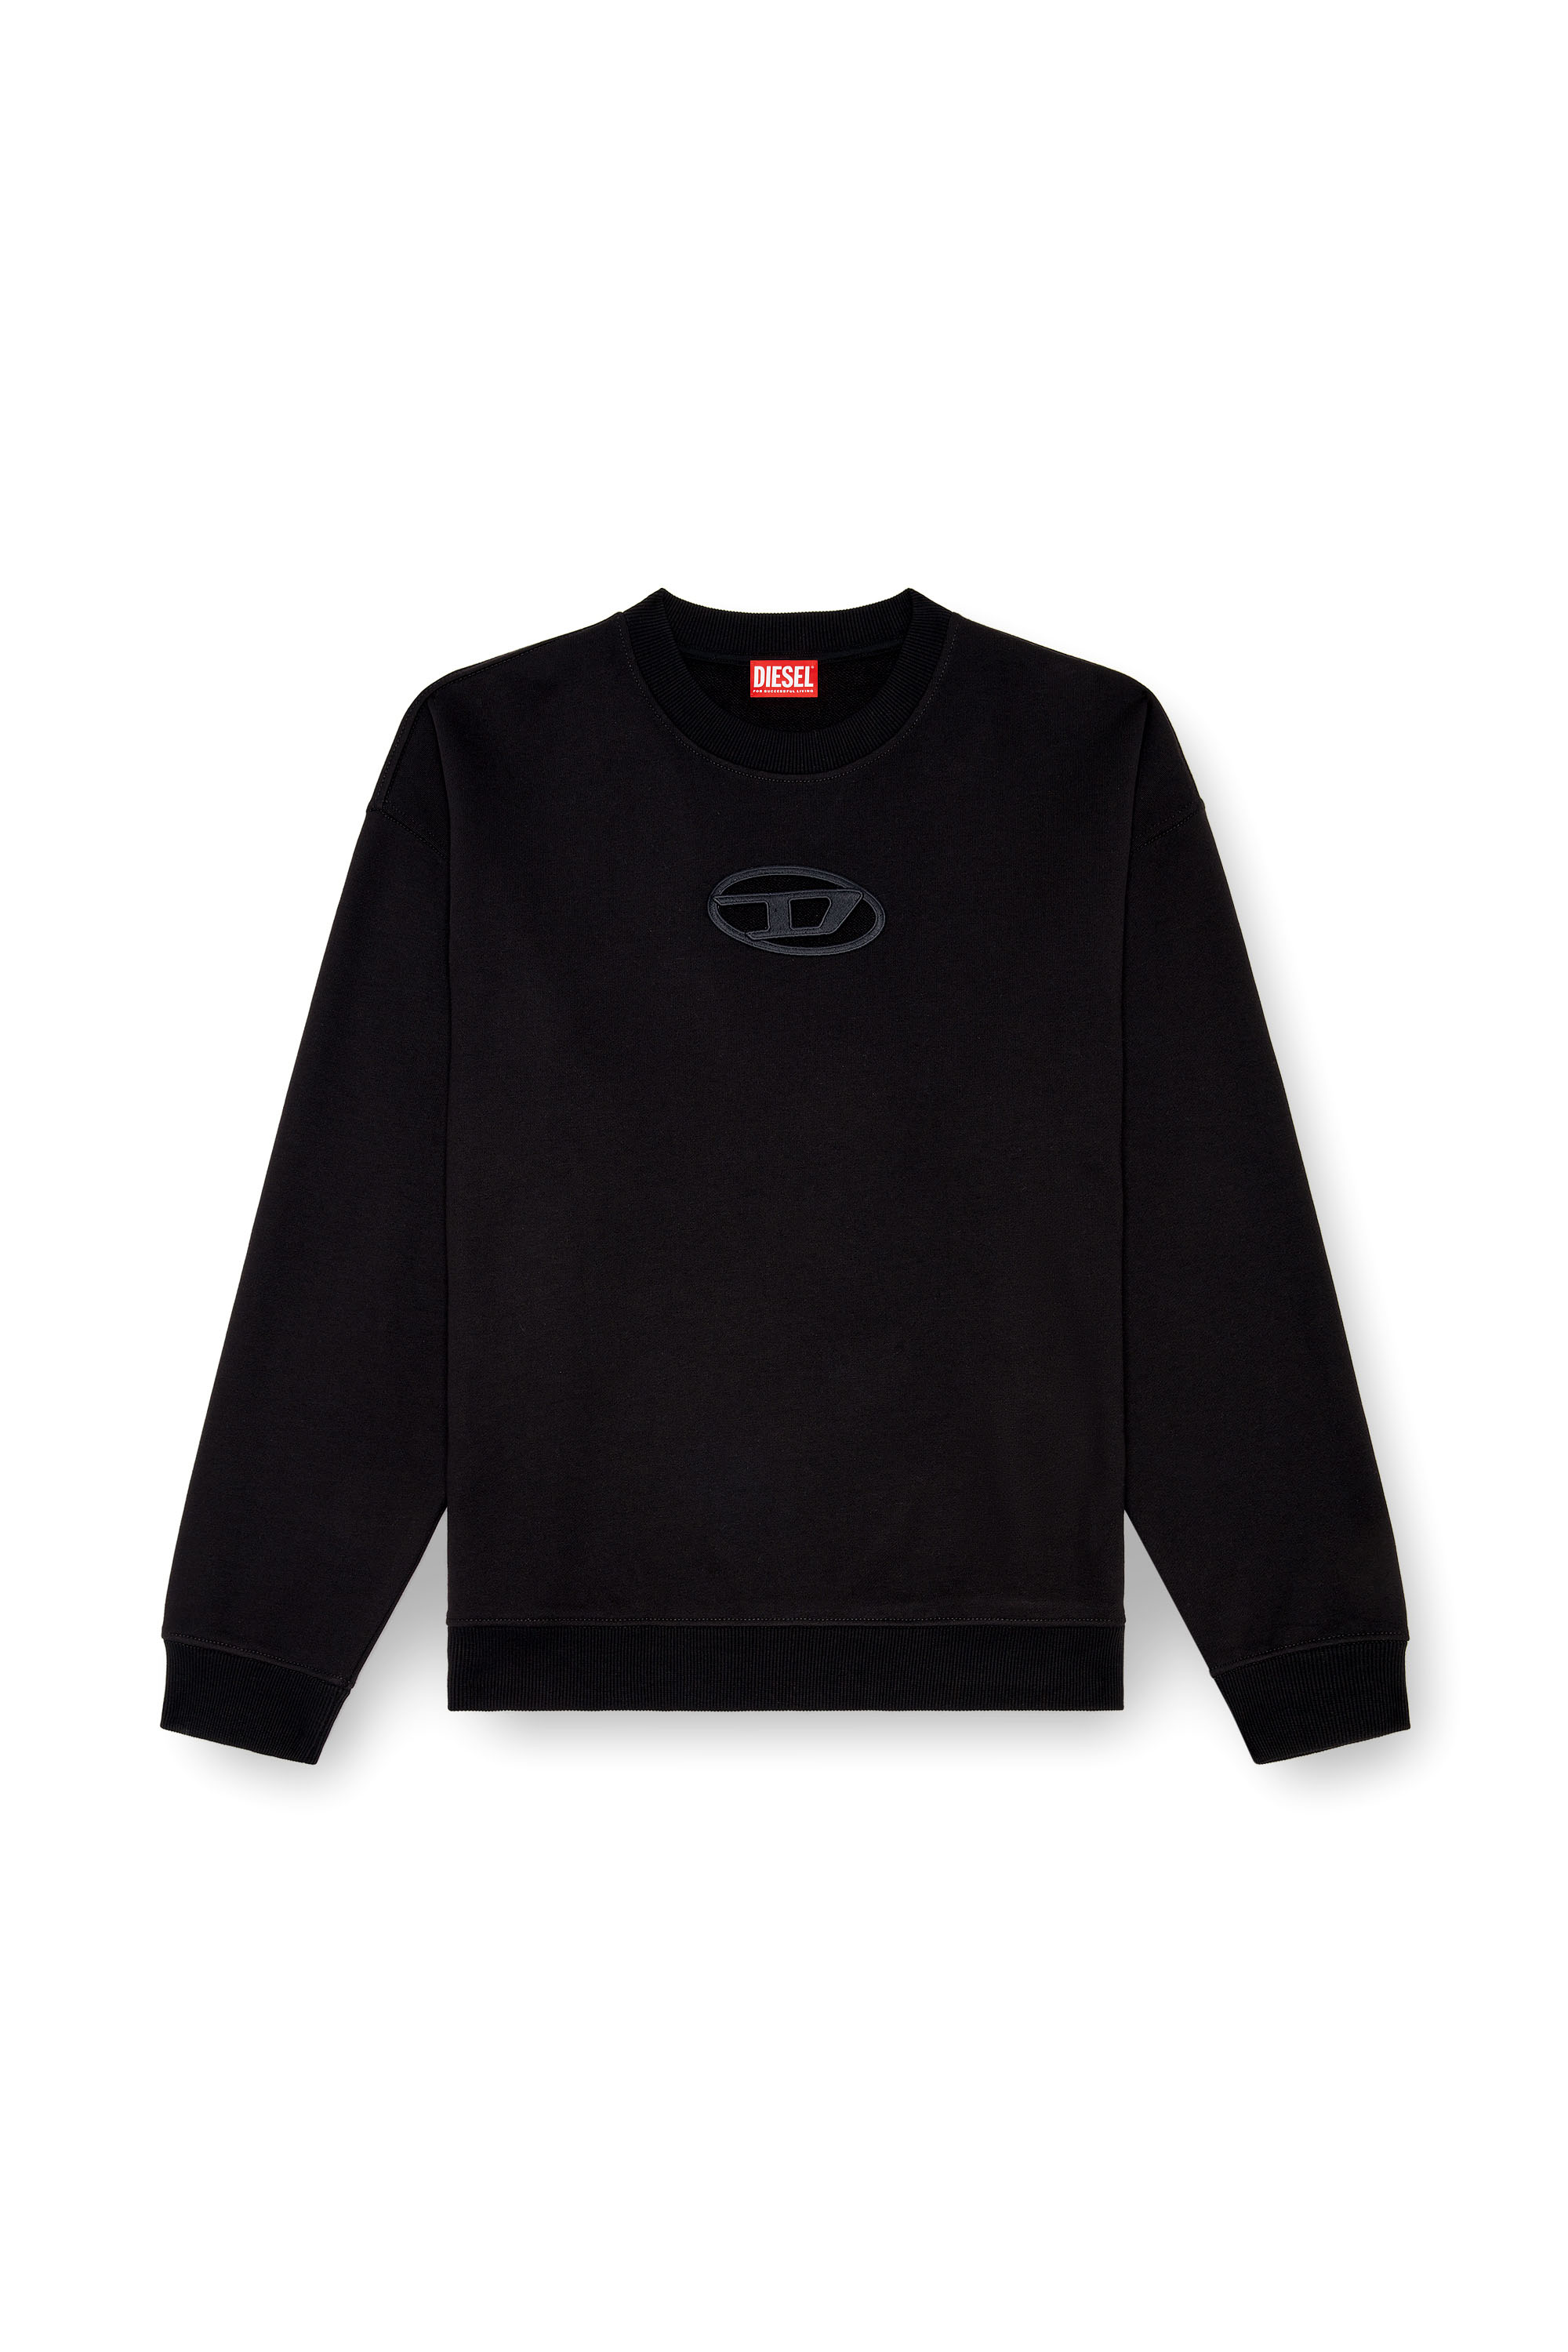 Diesel - S-BOXT-OD, Man Sweatshirt with cut-out Oval D logo in Black - Image 3